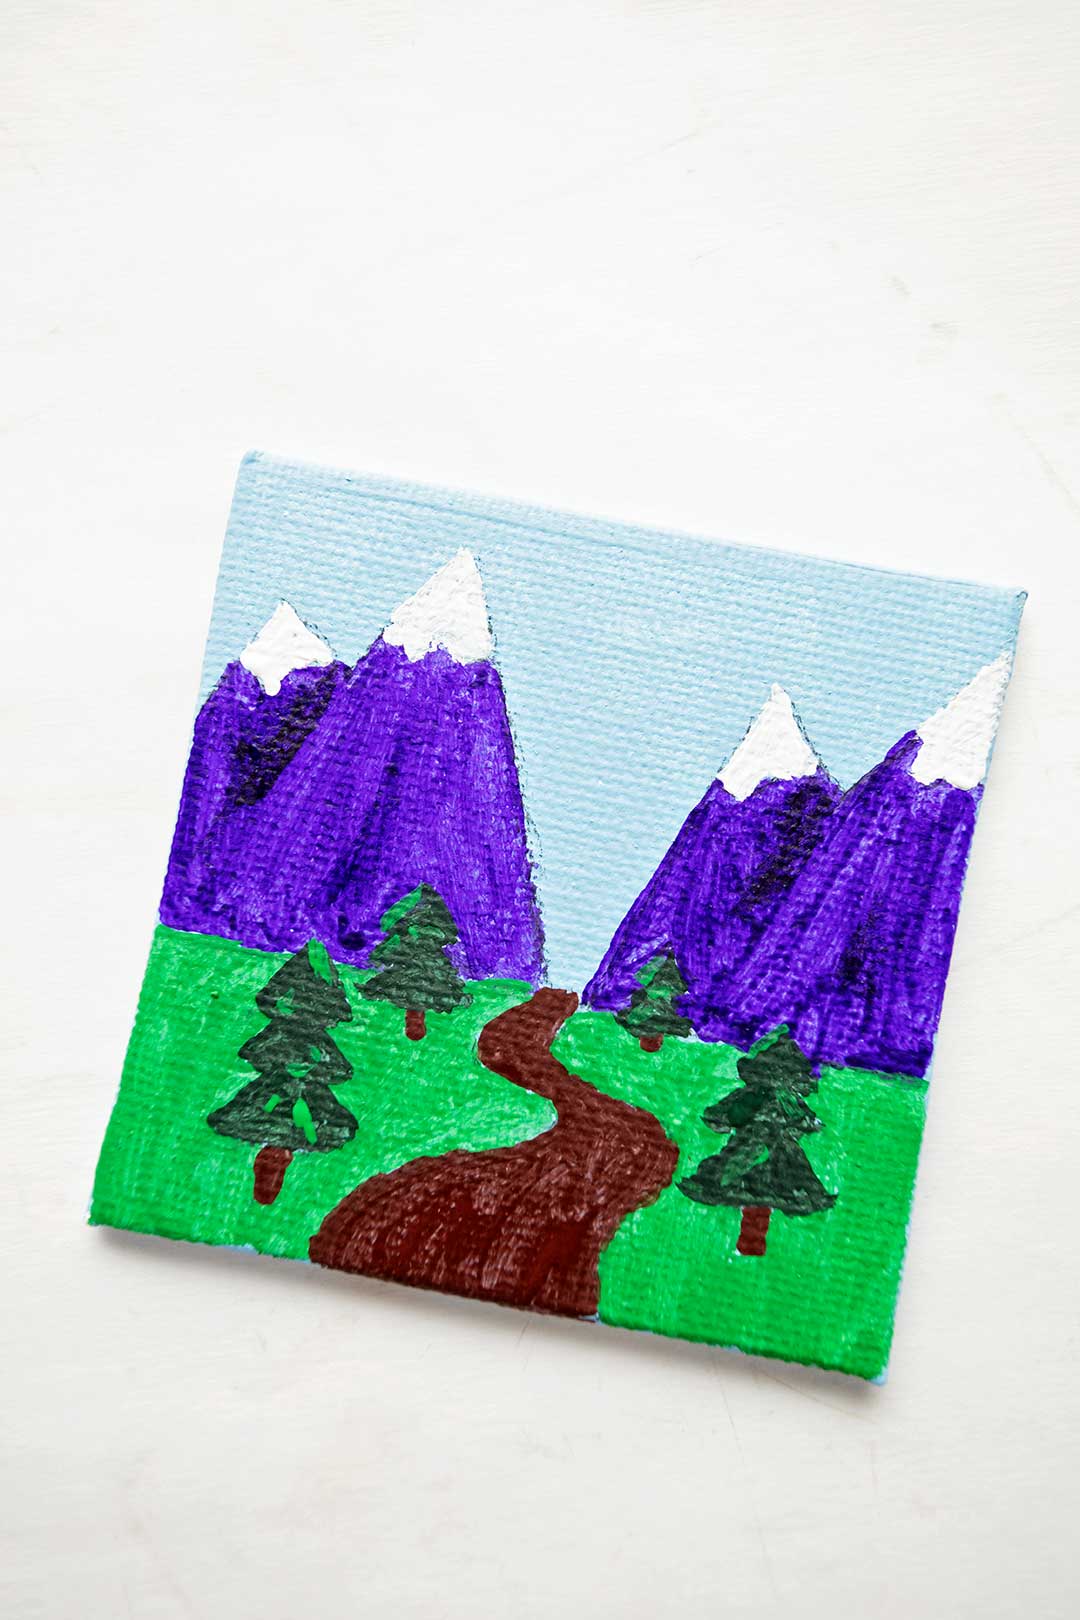 Finished mini canvas painting of purple mountains with trees and a trail.